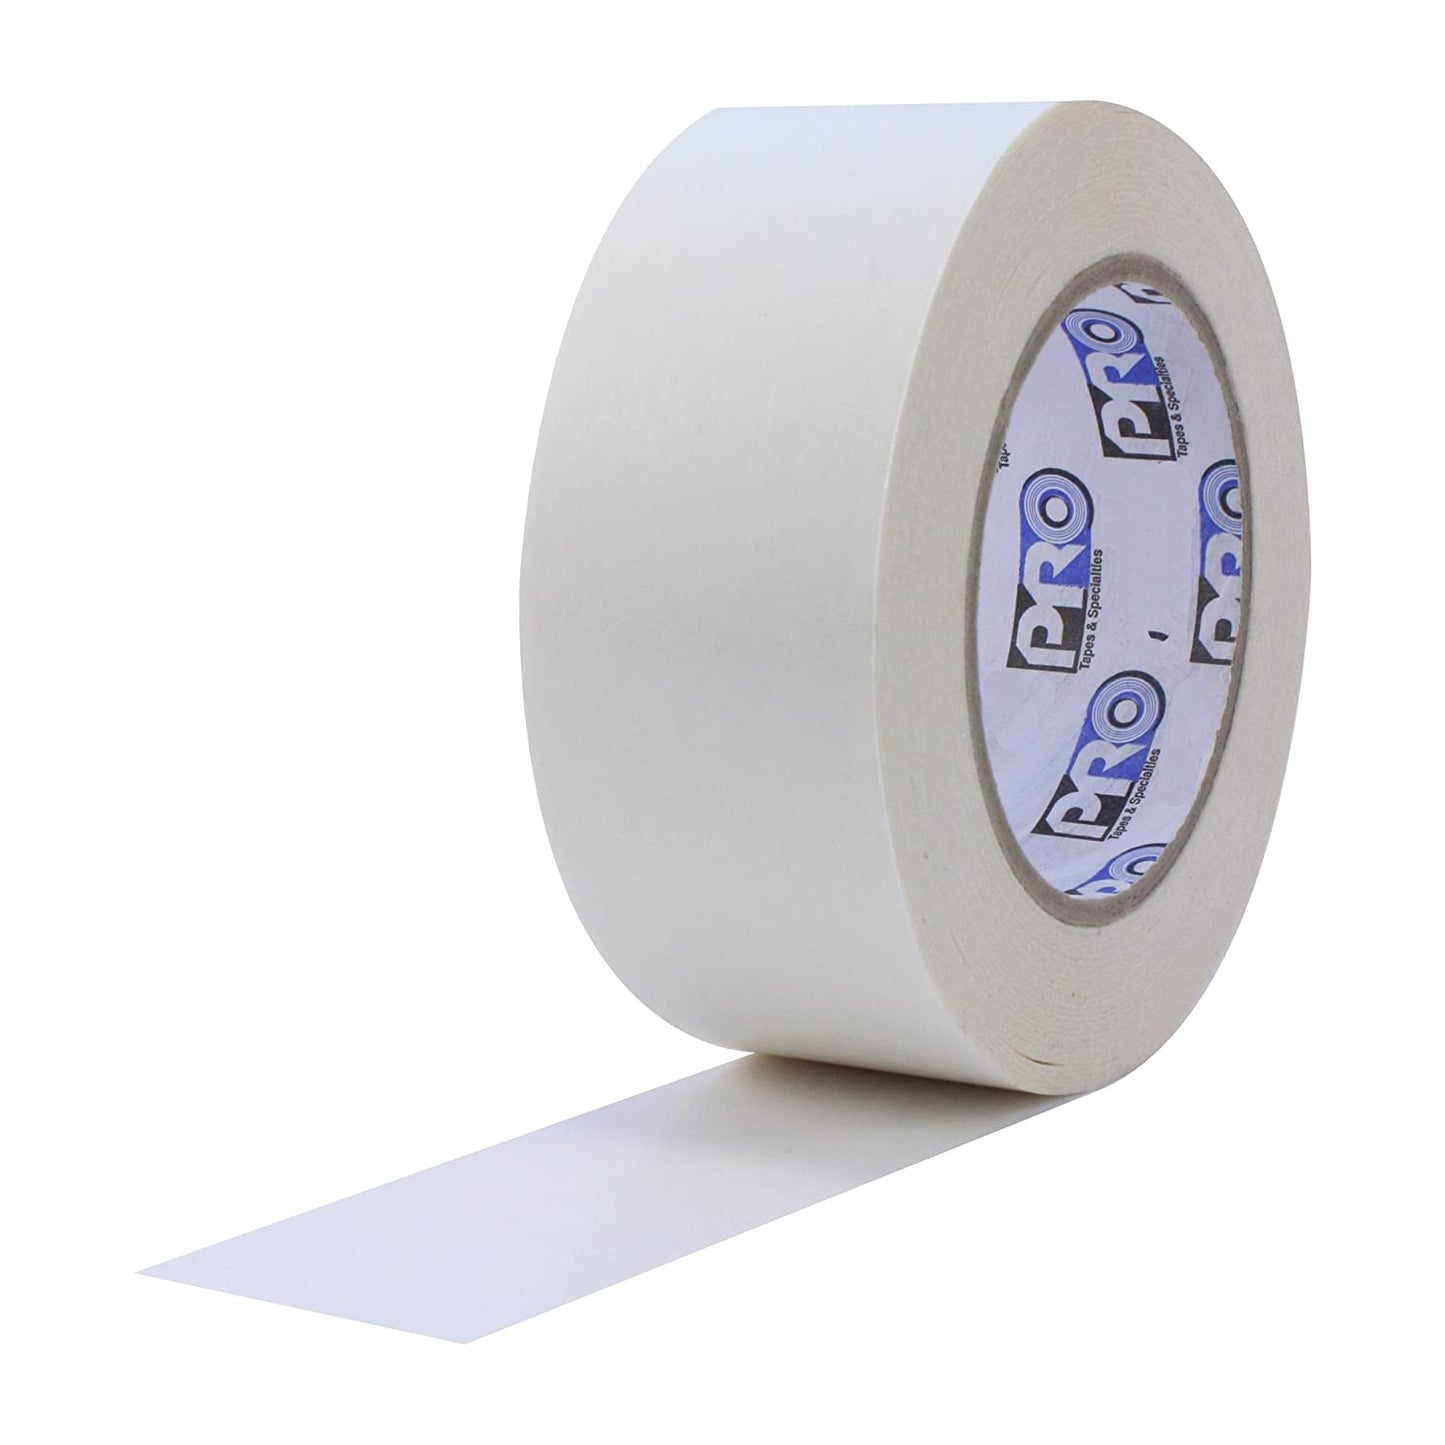 Double Sided Tape - Pro 408 - 2 inches X 55Yards Clear